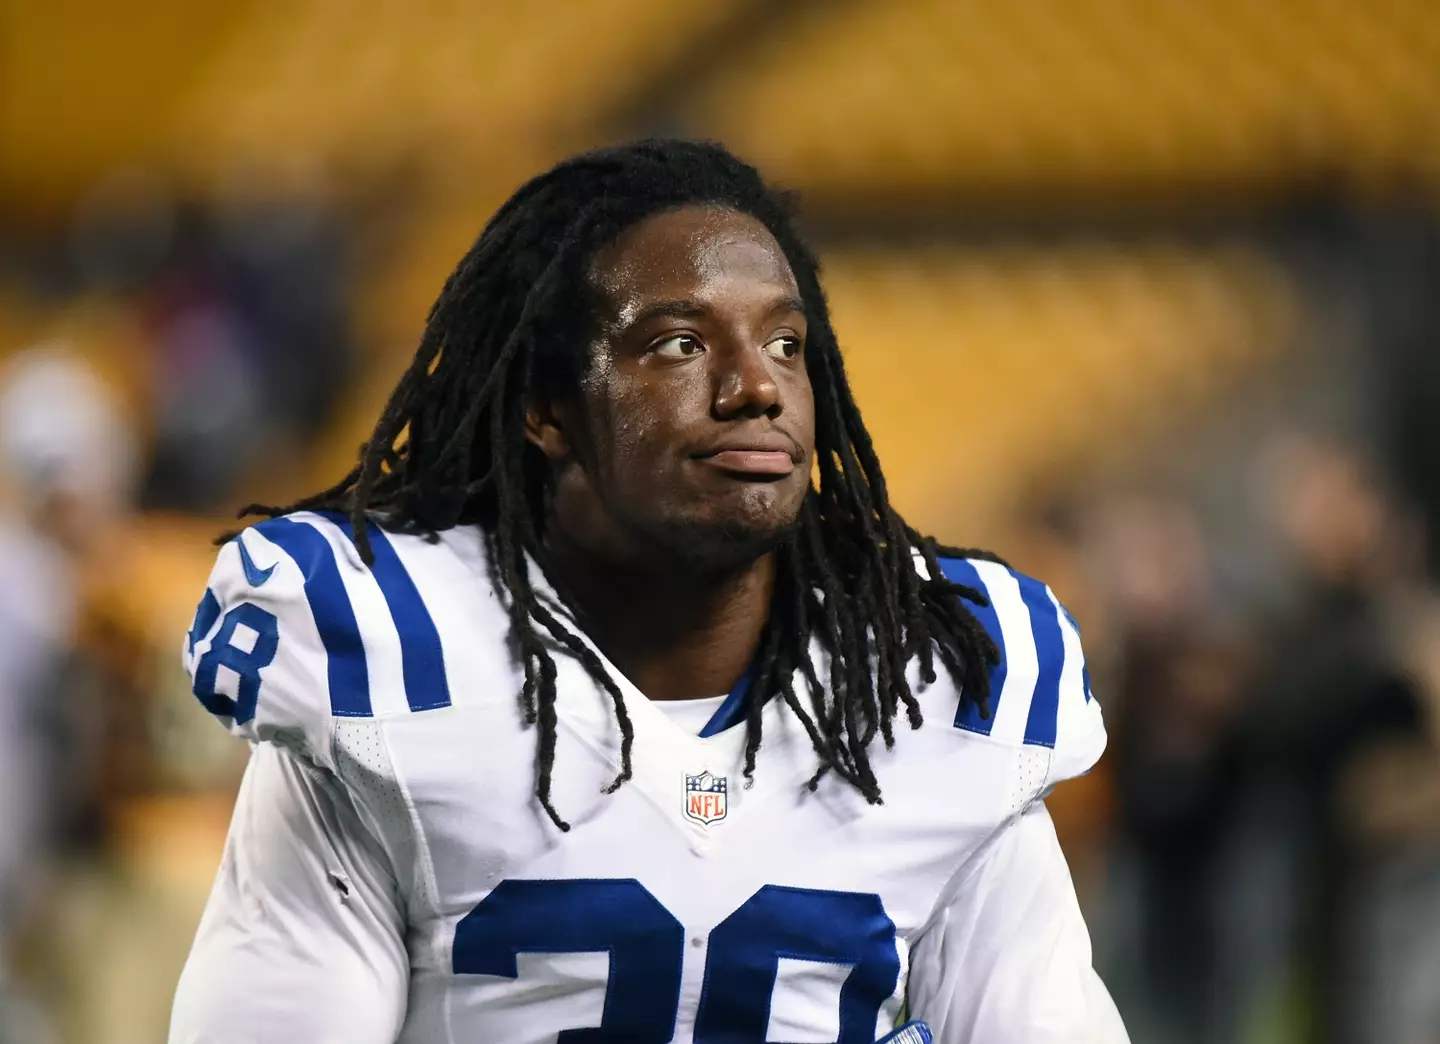 Sergio Brown hasn't been seen since his mother was discovered dead.